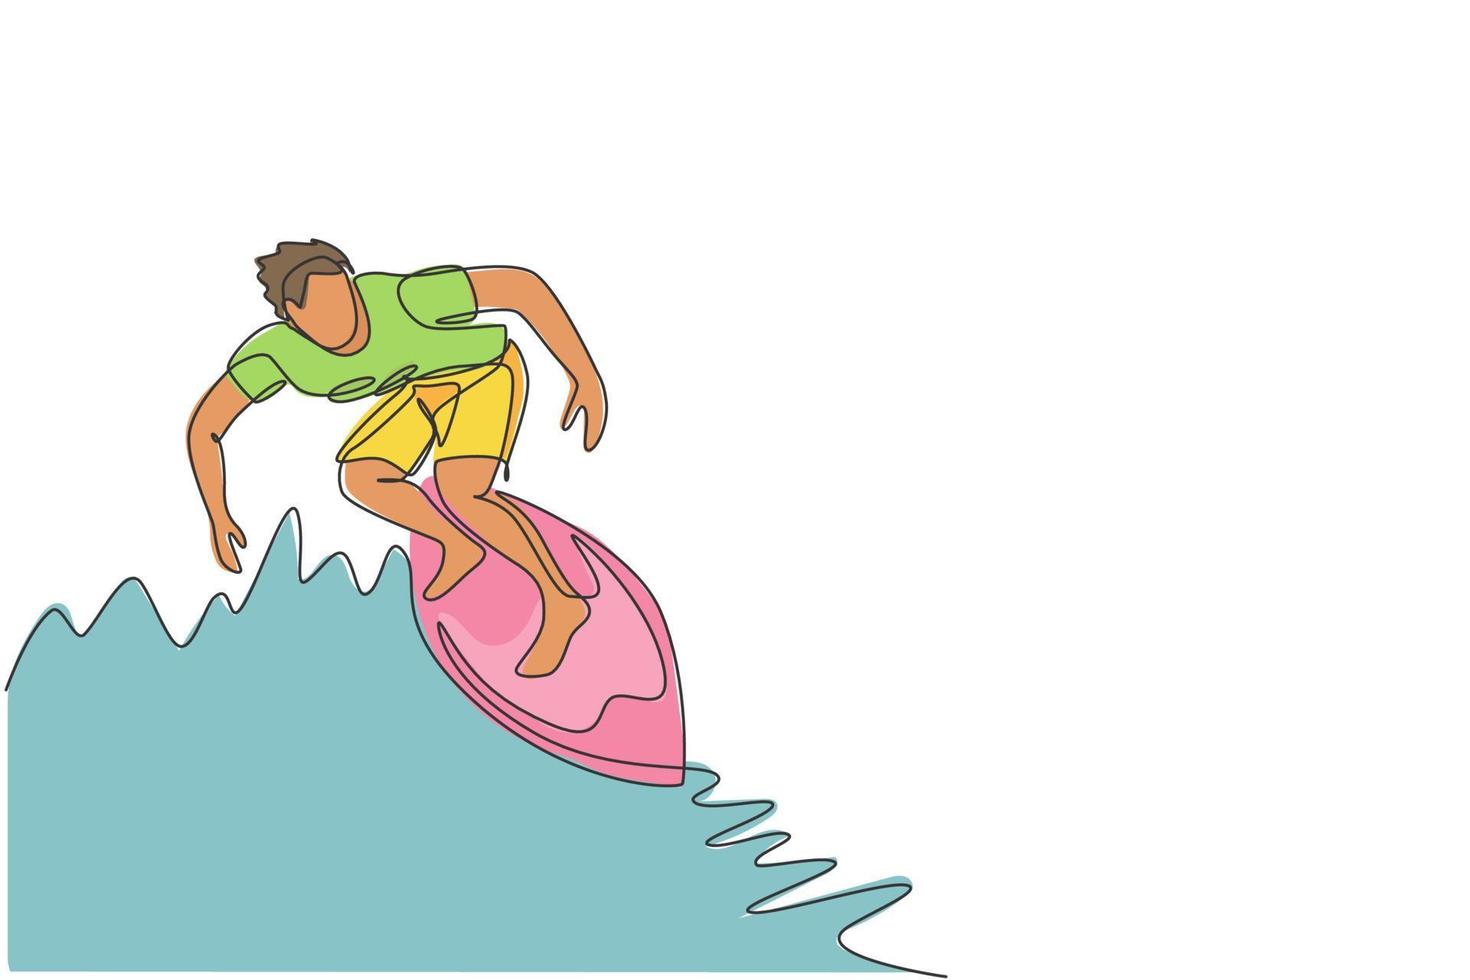 One single line drawing of young sporty surfer man riding on big waves barrel in surfing beach paradise vector illustration. Extreme water sport lifestyle concept. Modern continuous line draw design